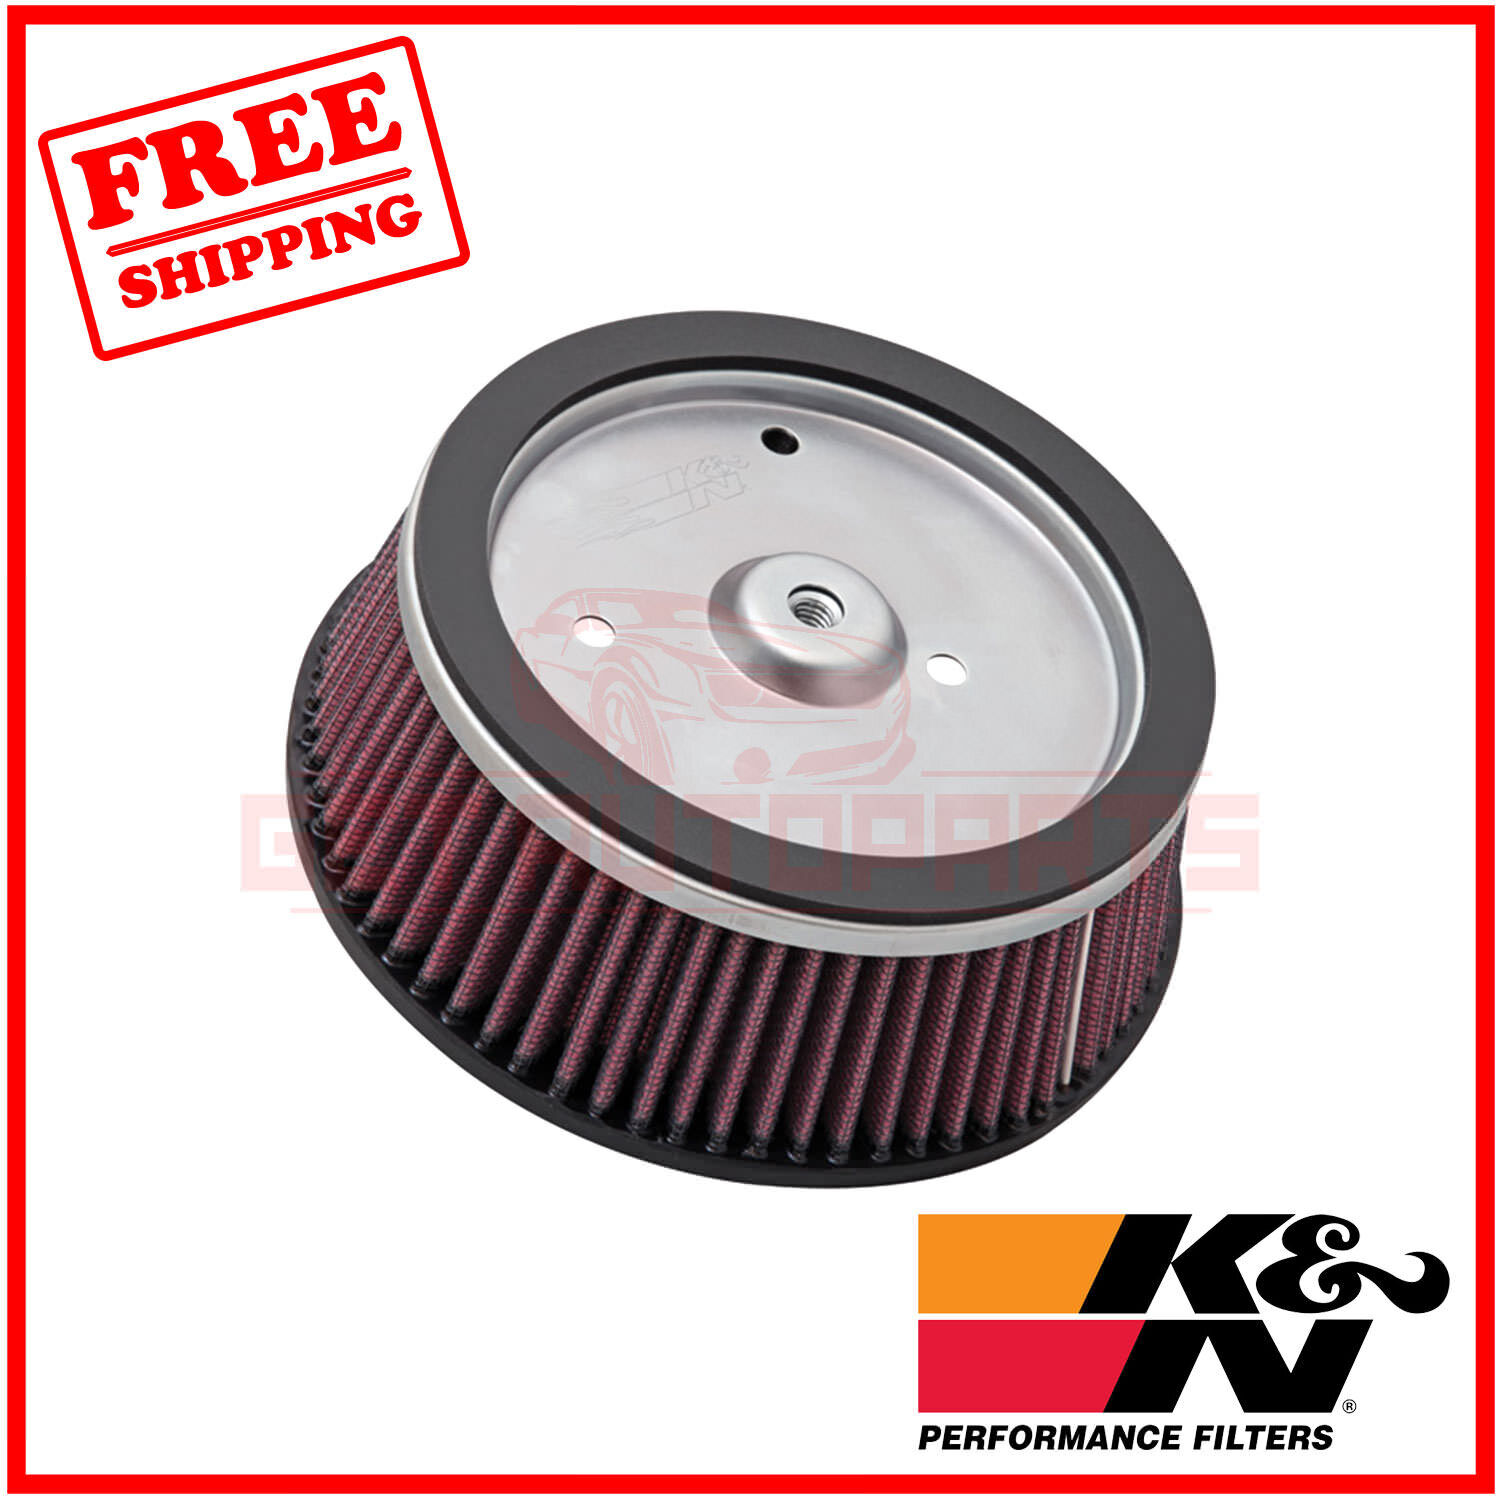 K&N Replacement Air Filter for Harley Davidson FLSTC Heritage Softail 2007-2013